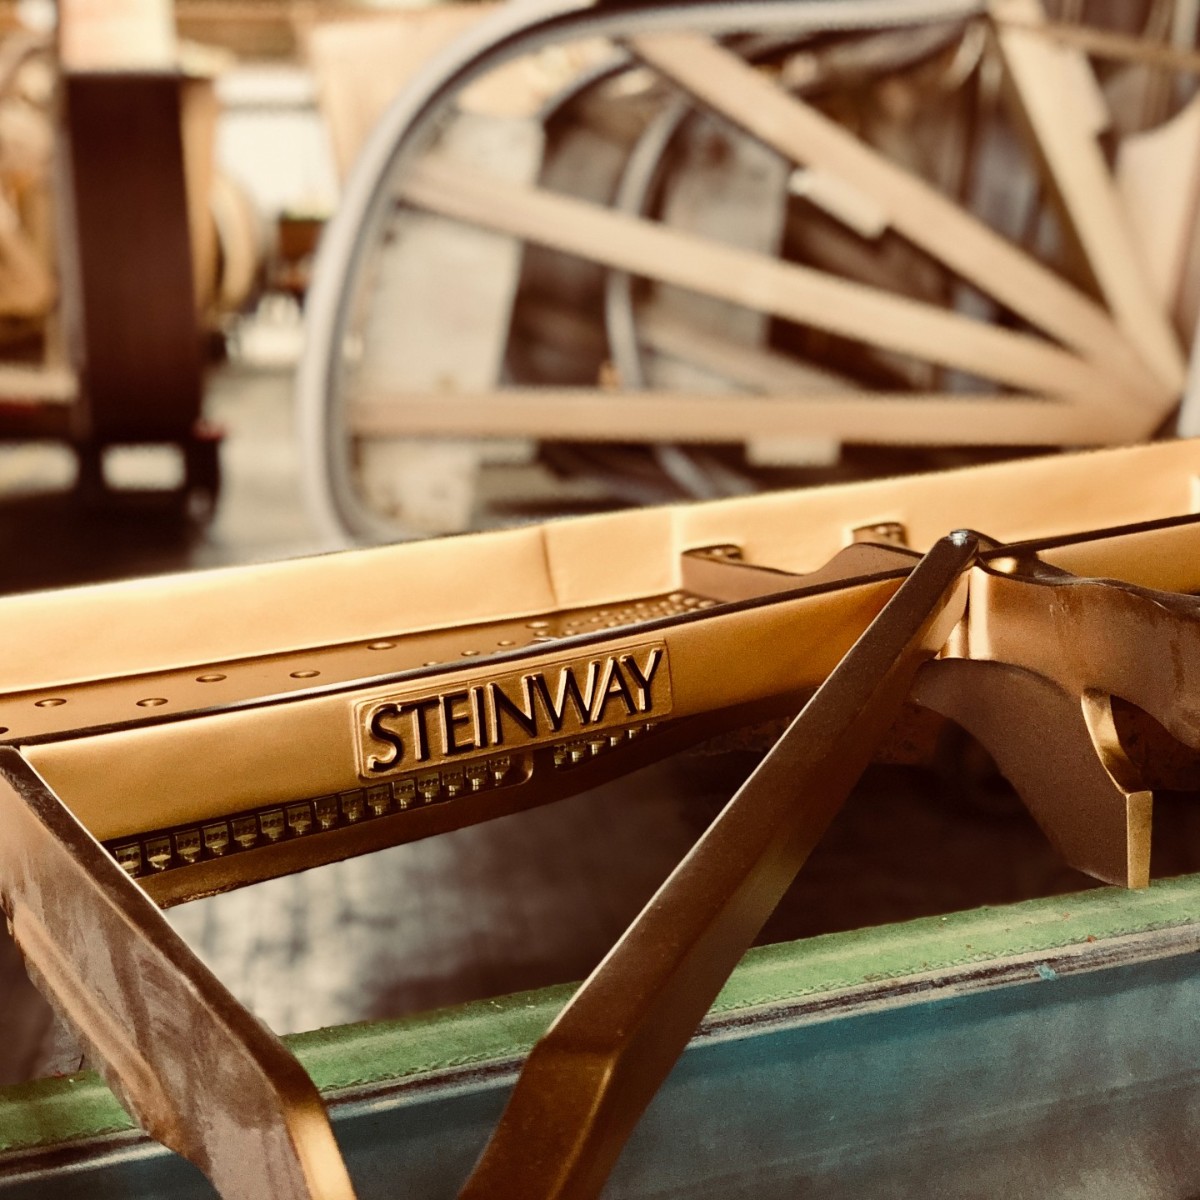 A Steinway can take nearly a year to make. Journey through our New York Factory on an epic tour to see what makes the handmade Steinway the finest piano in the world. ▶️ brnw.ch/21wJm9K  🎹✨